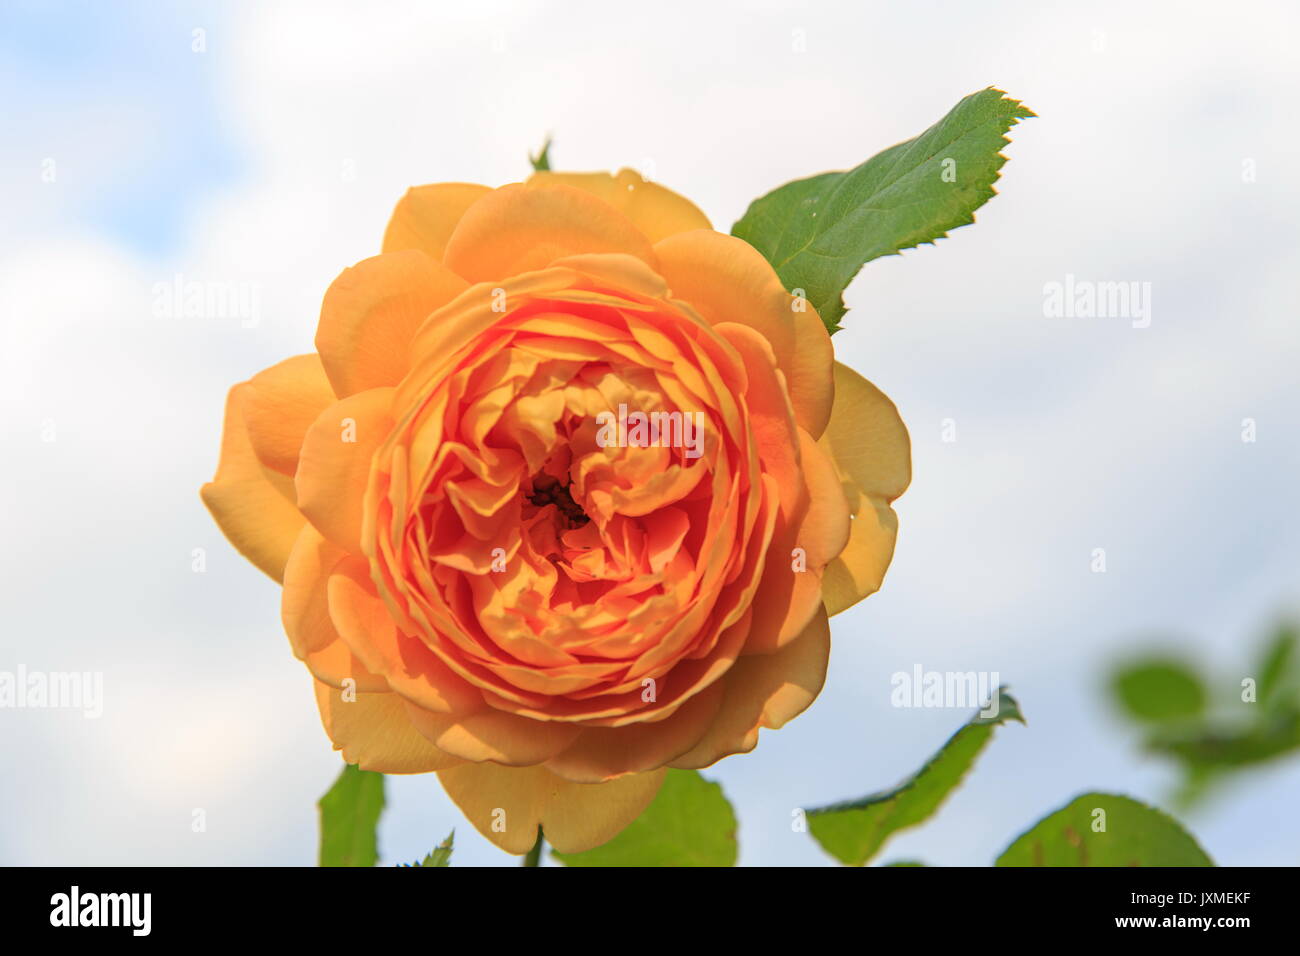 Blooming yellow English rose in the garden on a sunny day. Rose 'Golden Celebration' Stock Photo